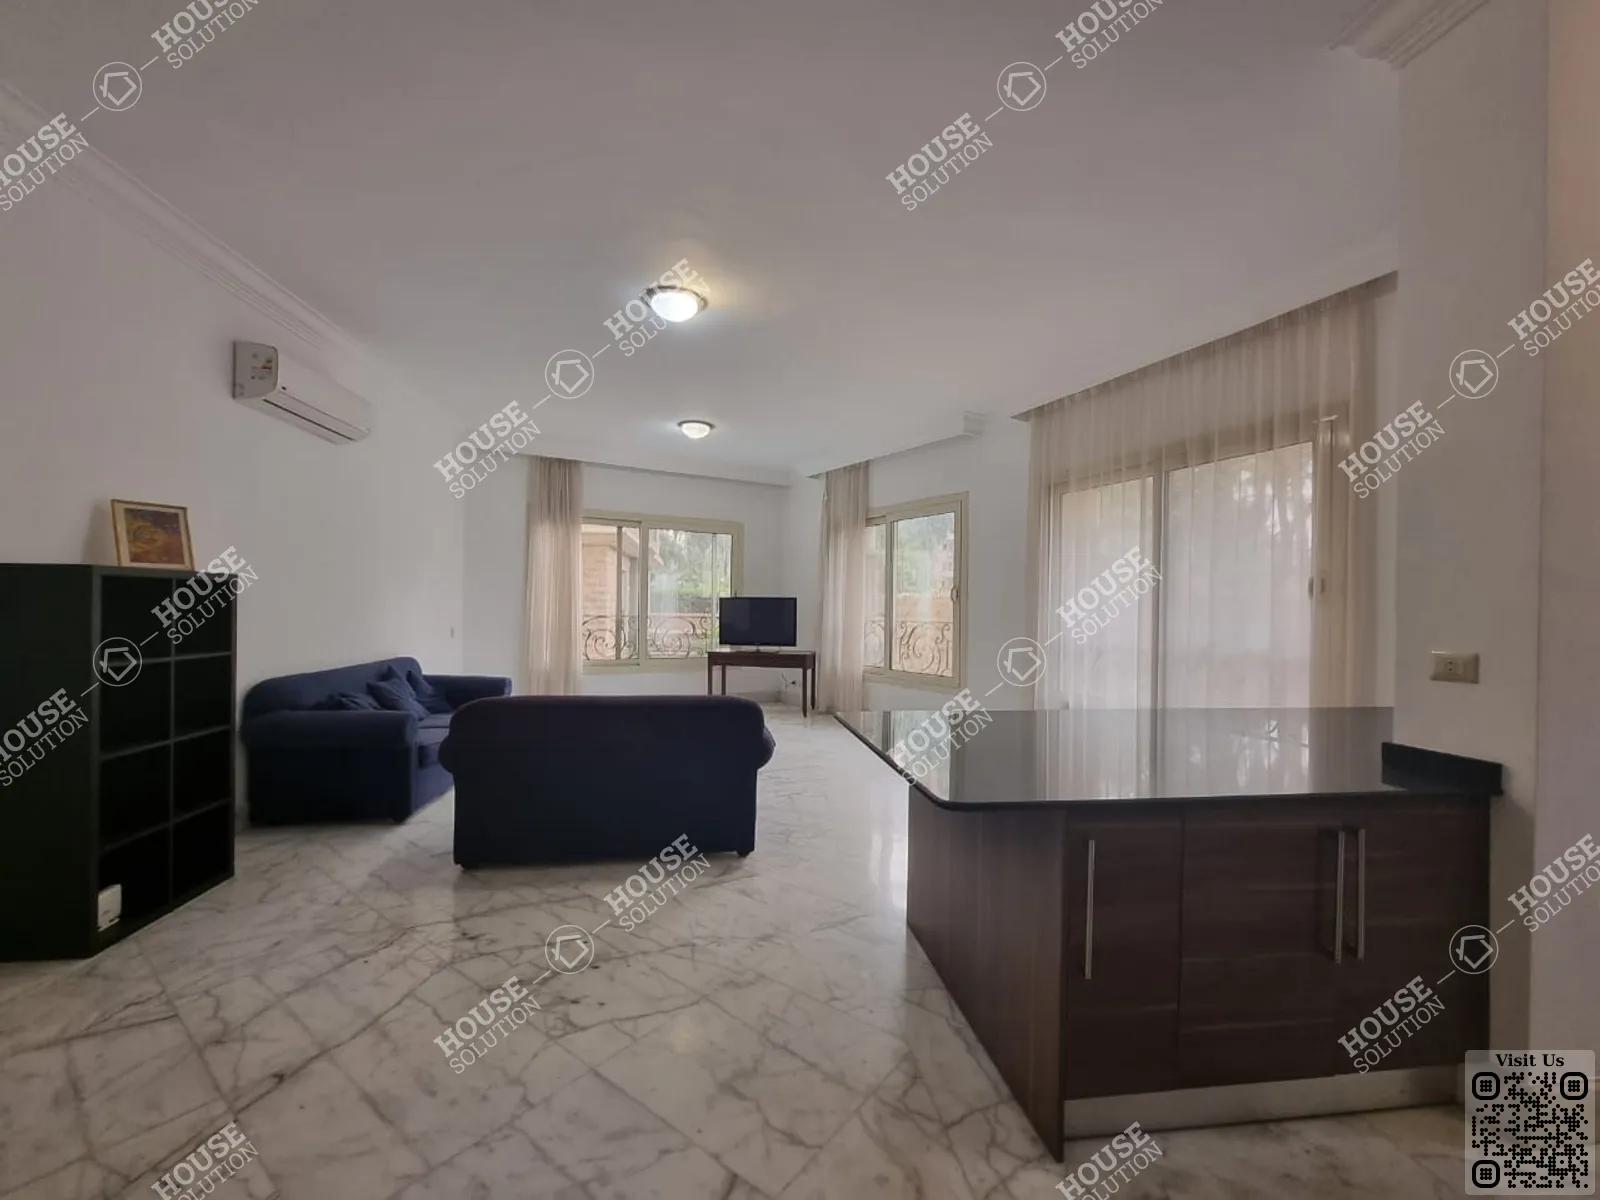 RECEPTION  @ Apartments For Rent In Maadi Maadi Sarayat Area: 184 m² consists of 2 Bedrooms 3 Bathrooms Modern furnished 5 stars #5268-0